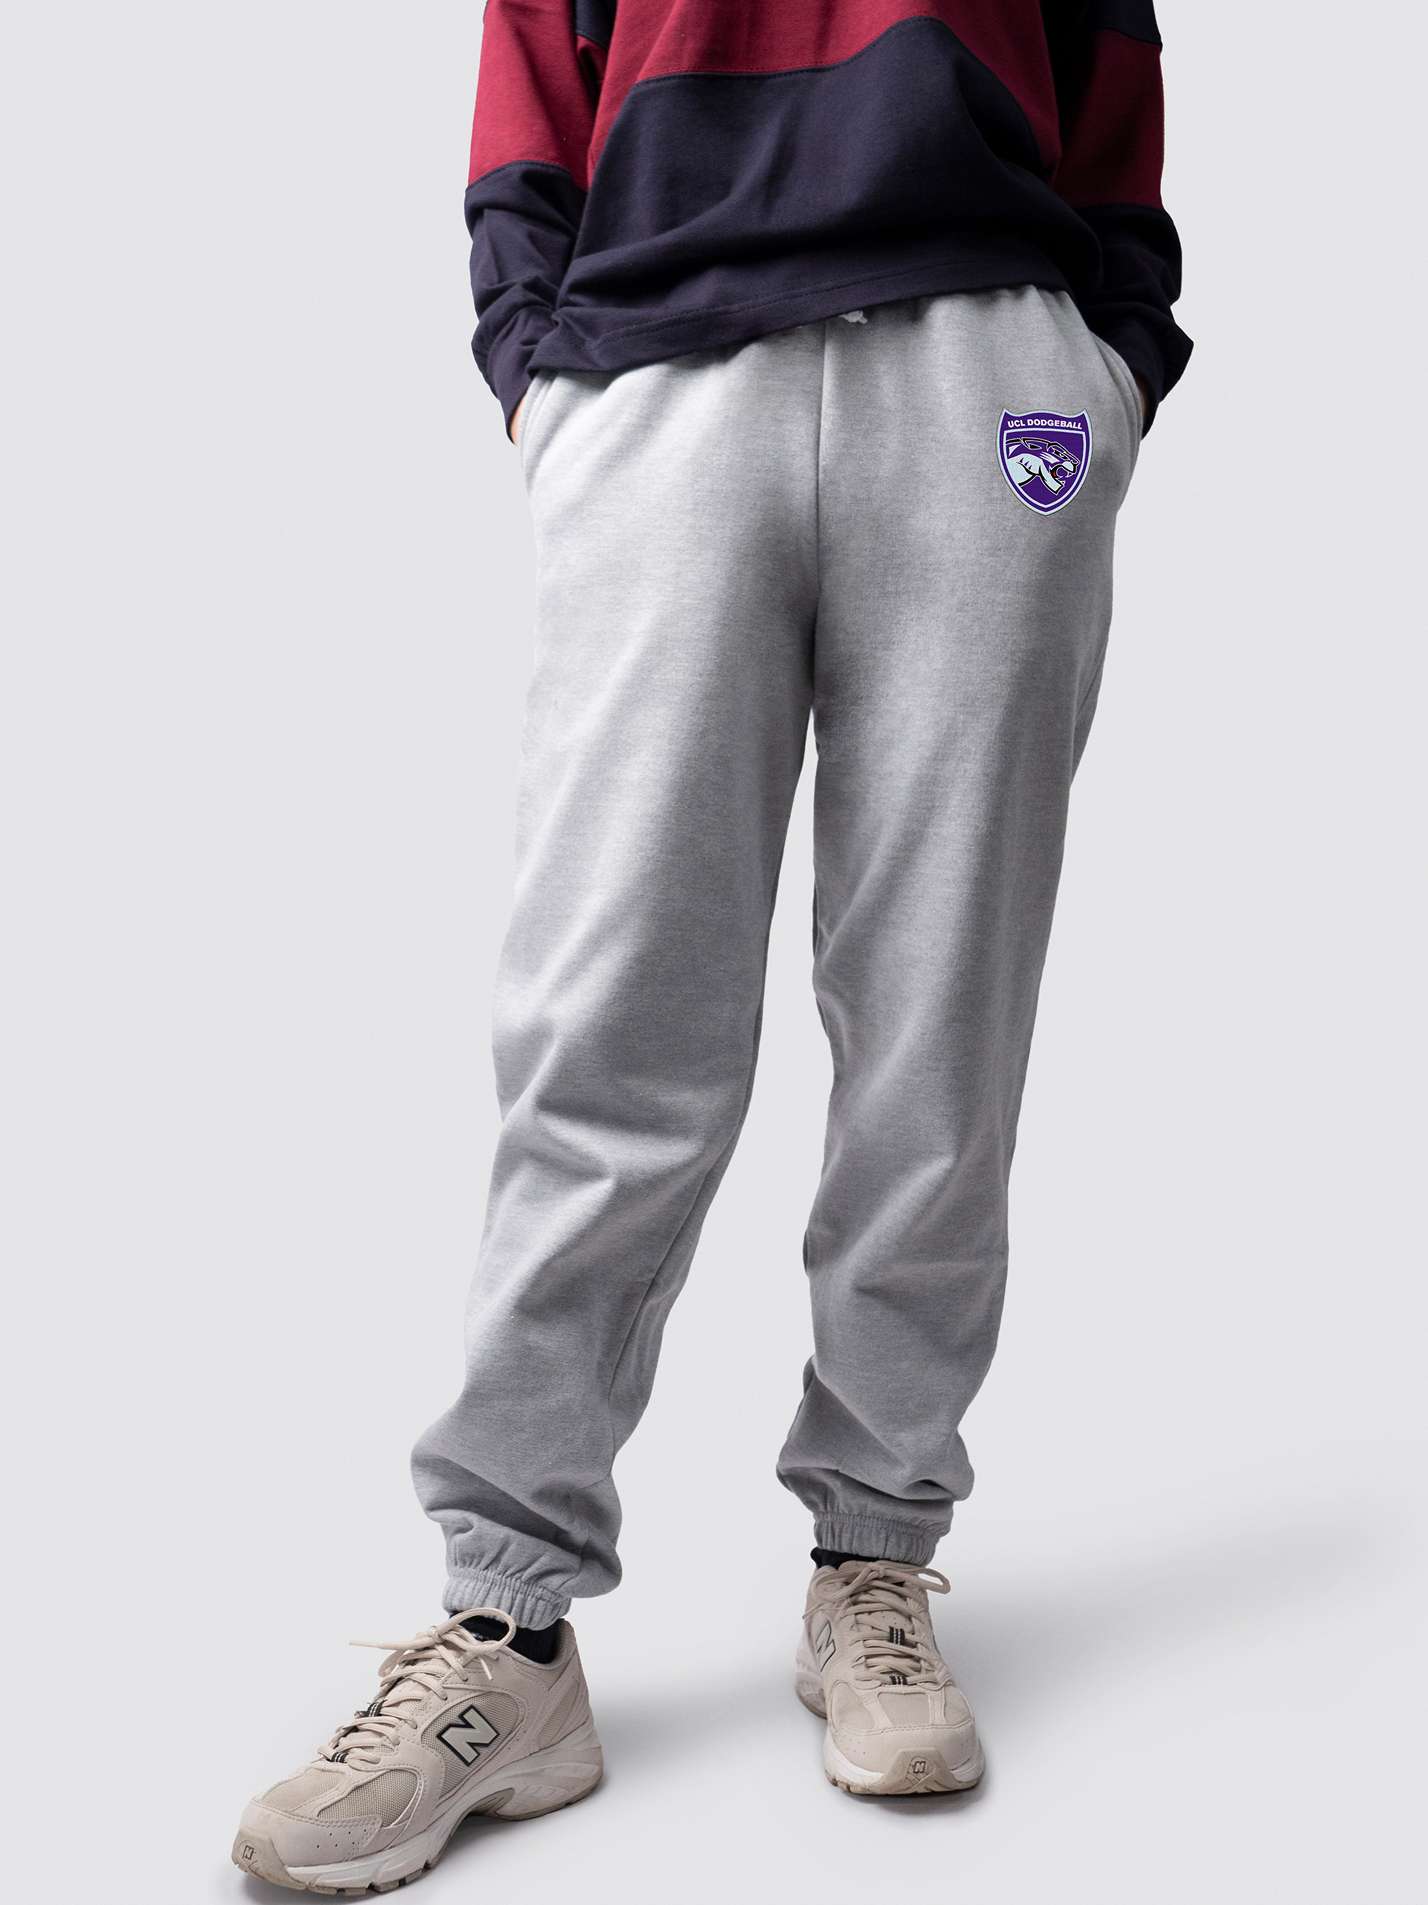 UCL Dodgeball Unisex Classic Fit Bottoms